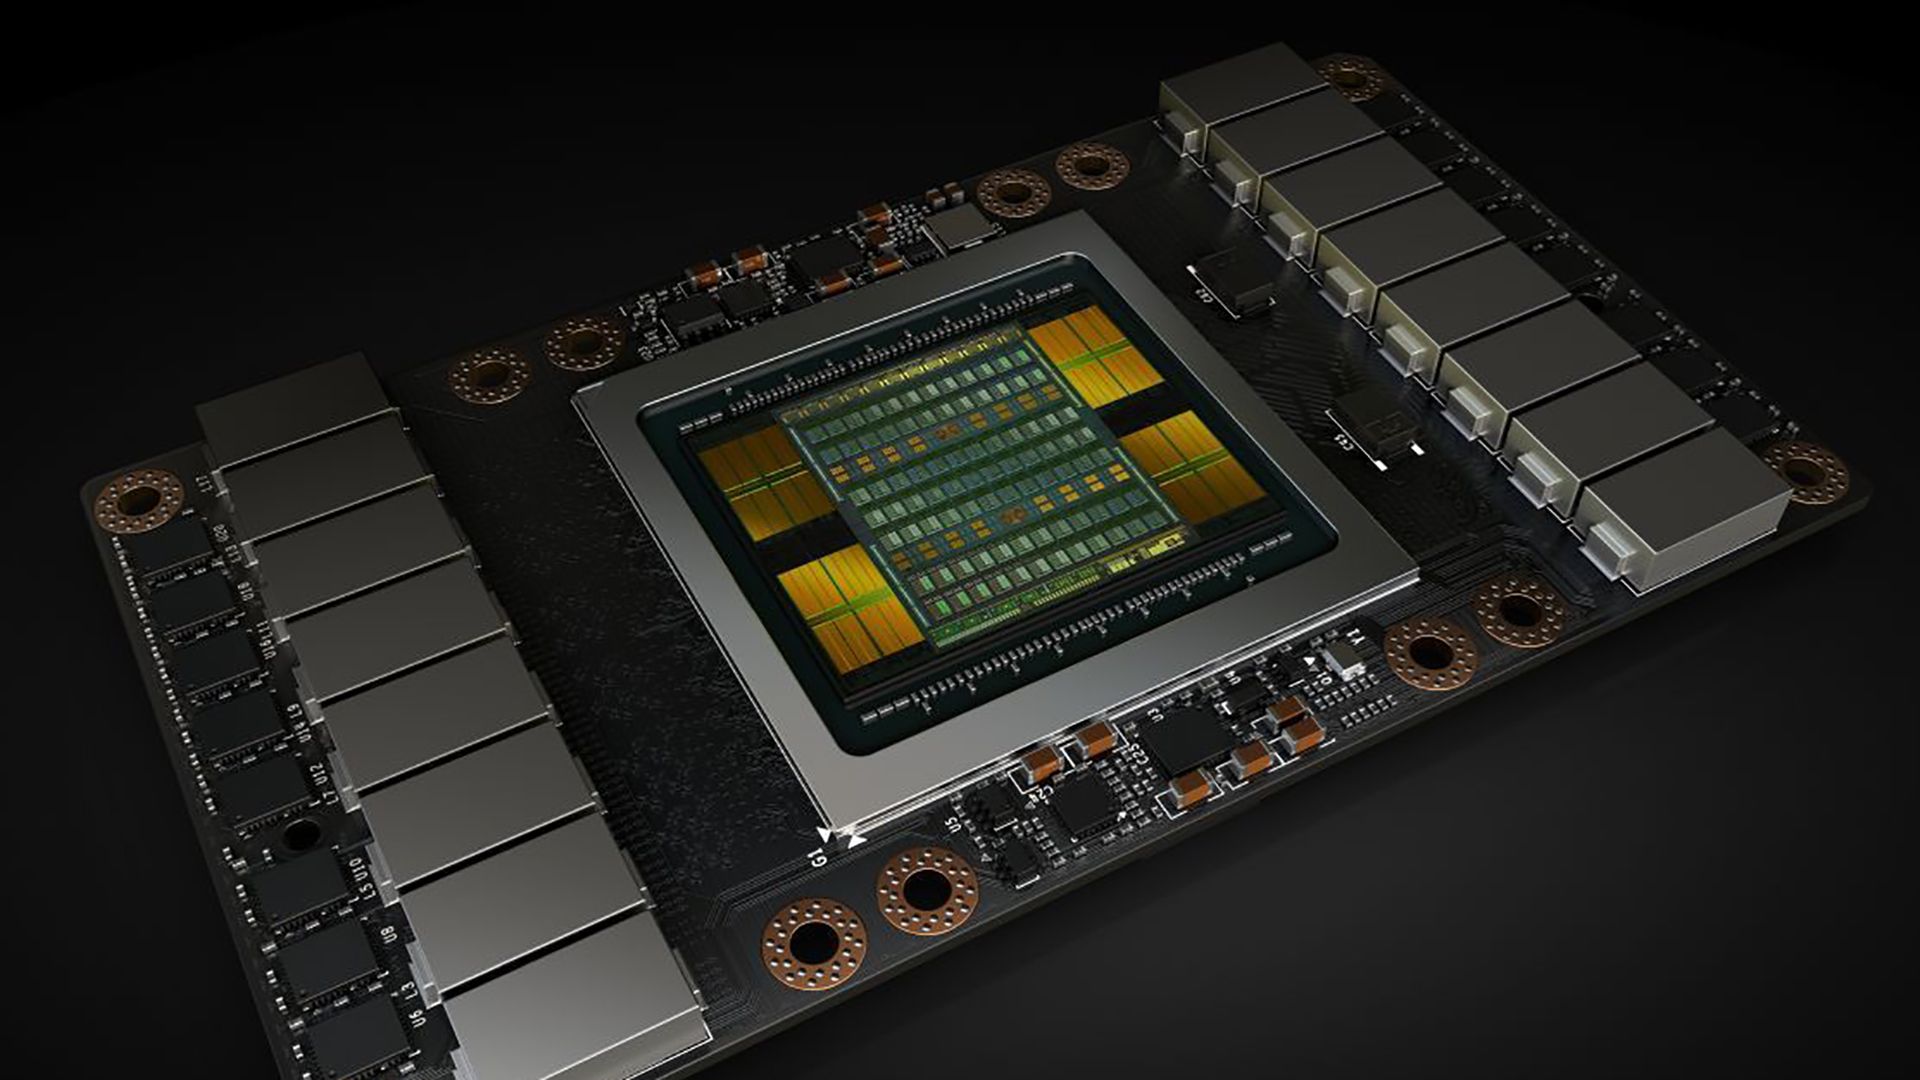 Nvidia and IBM have a plan to connect GPUs straight to SSDs | TechRadar